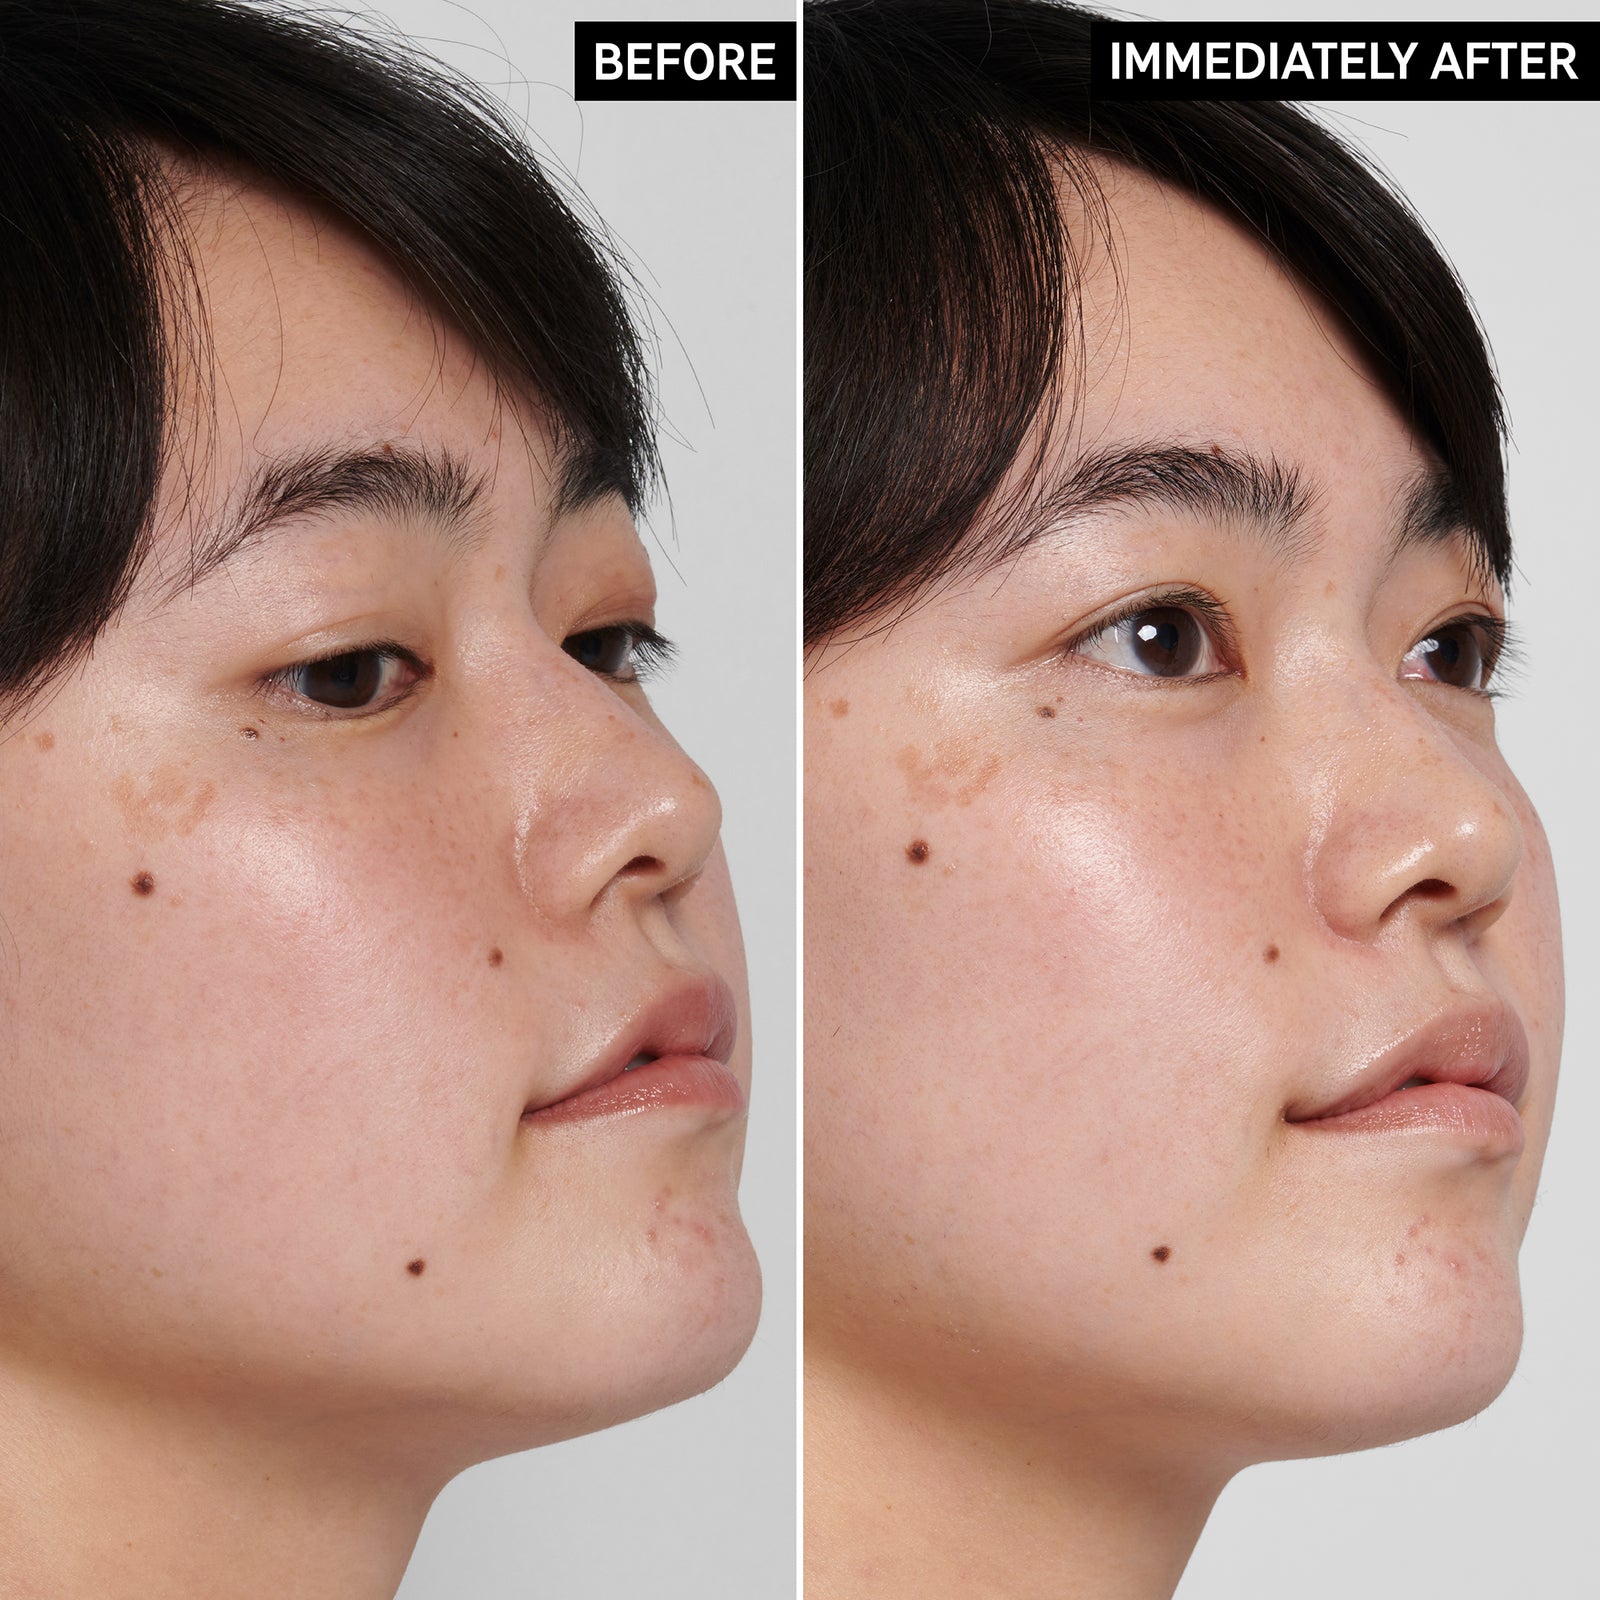 Two images of a model's face side by side to show before and after using Hyaluronic Acid Cleanser